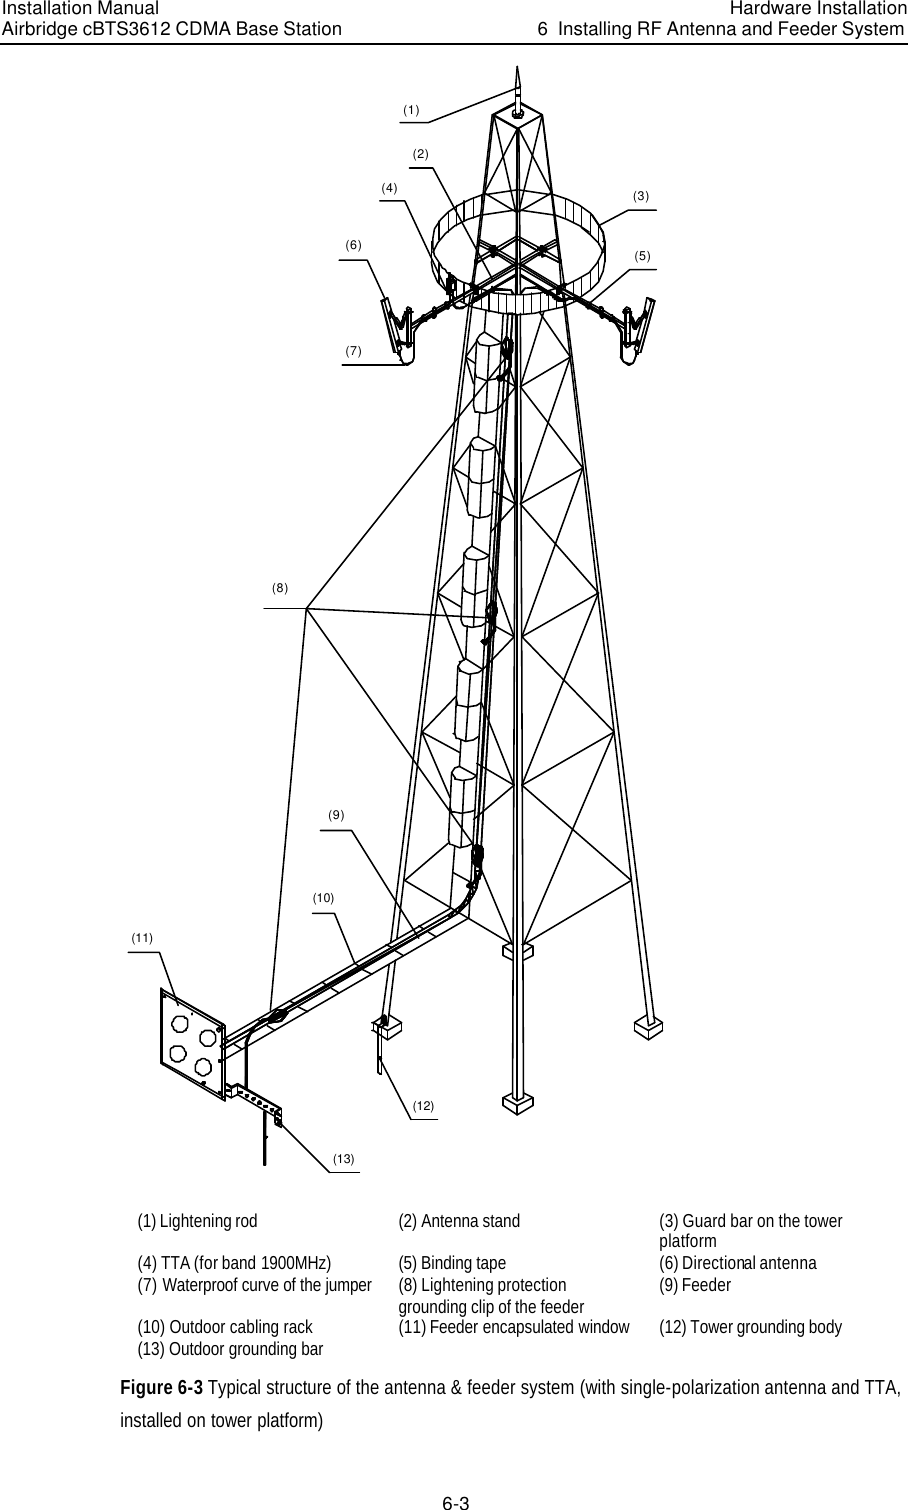 Installation Manual Airbridge cBTS3612 CDMA Base Station Hardware Installation6  Installing RF Antenna and Feeder System 6-3 (11)(12)(13)(1)(2)(3)(4)(5)(6)(7)(8)(9)(10) (1) Lightening rod (2) Antenna stand (3) Guard bar on the tower platform (4) TTA (for band 1900MHz) (5) Binding tape (6) Directional antenna (7) Waterproof curve of the jumper (8) Lightening protection grounding clip of the feeder (9) Feeder (10) Outdoor cabling rack  (11) Feeder encapsulated window (12) Tower grounding body  (13) Outdoor grounding bar     Figure 6-3 Typical structure of the antenna &amp; feeder system (with single-polarization antenna and TTA, installed on tower platform) 